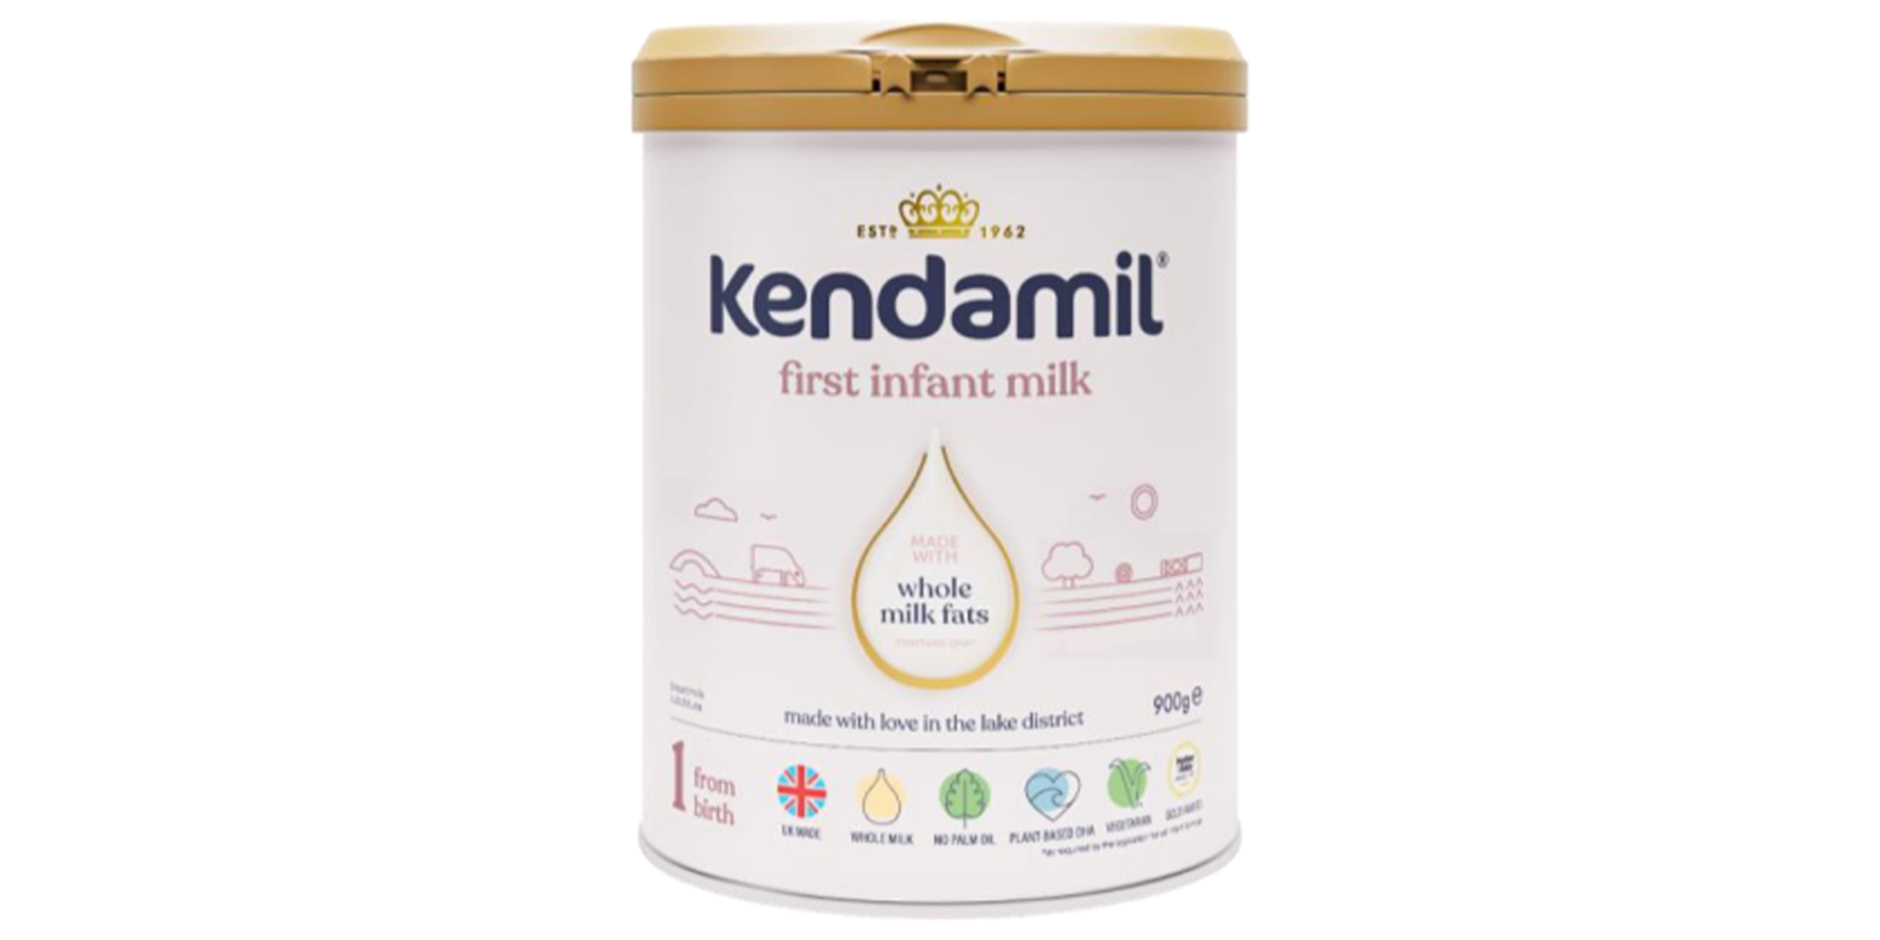 A can of Kendamil Classic formula